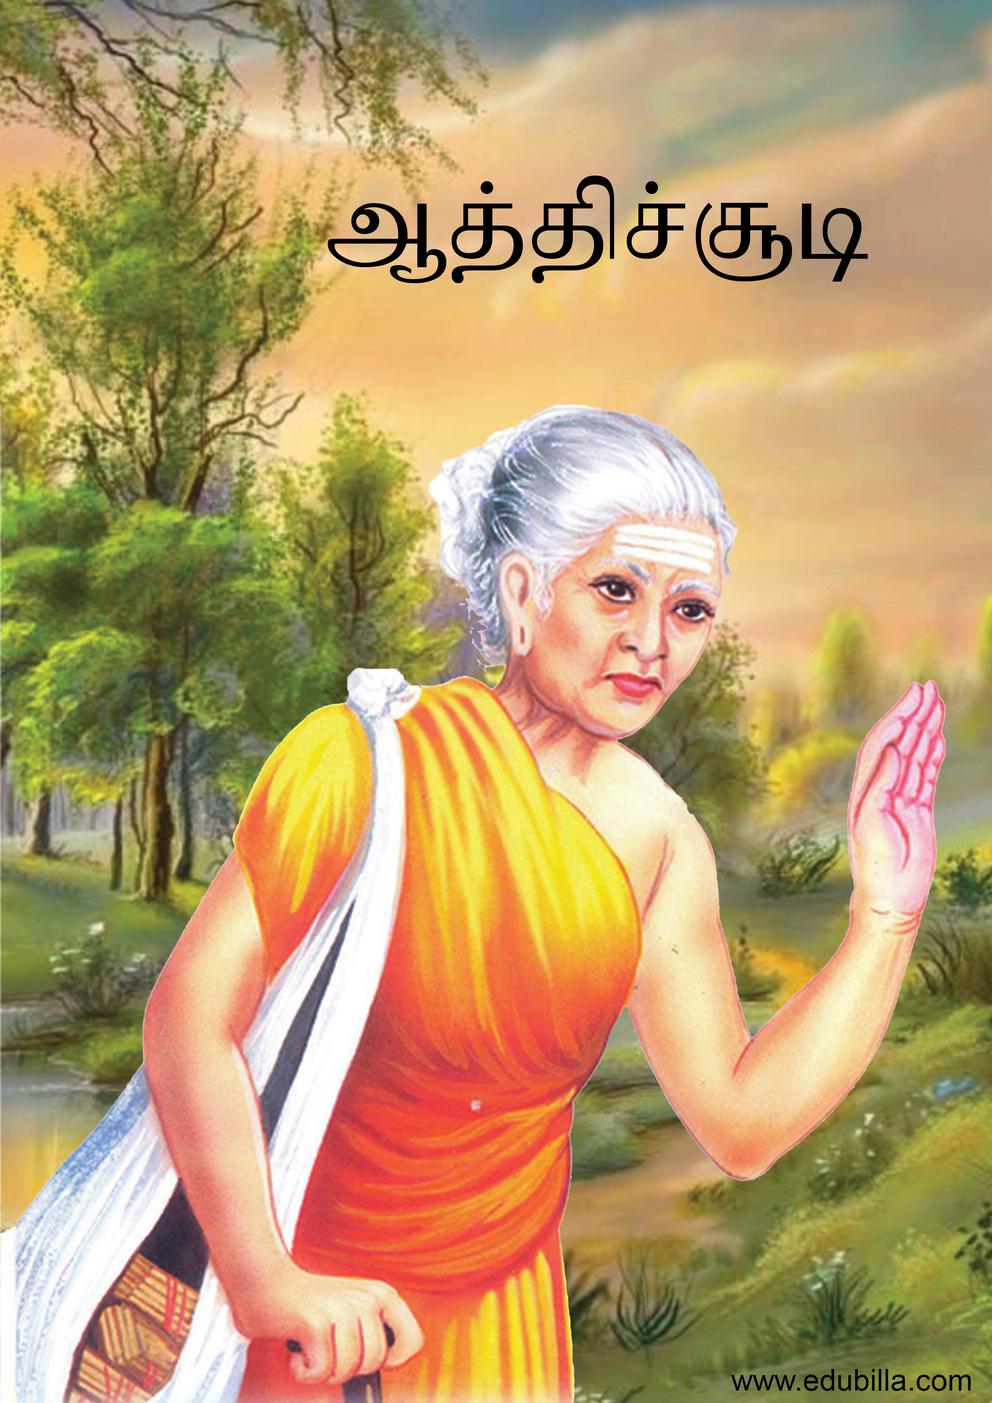 aathichudi in tamil images